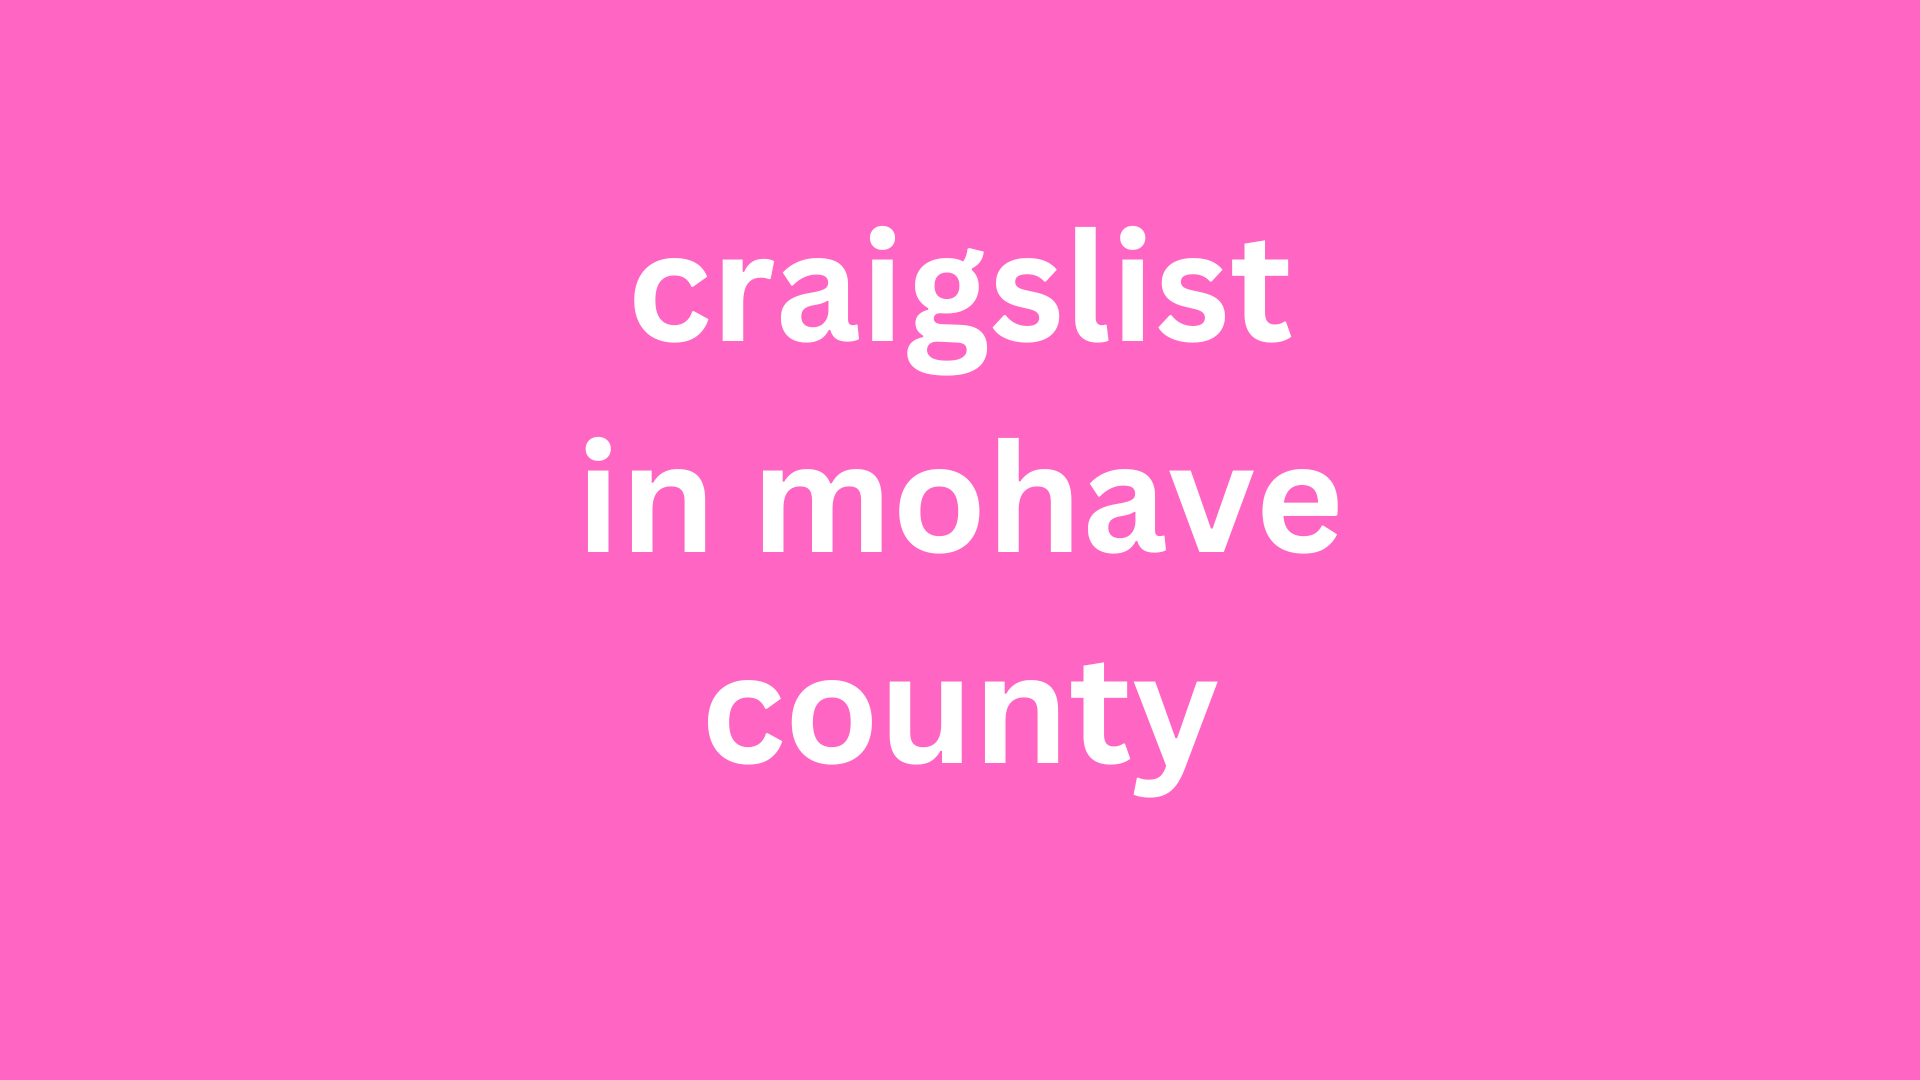 craigslist in mohave county